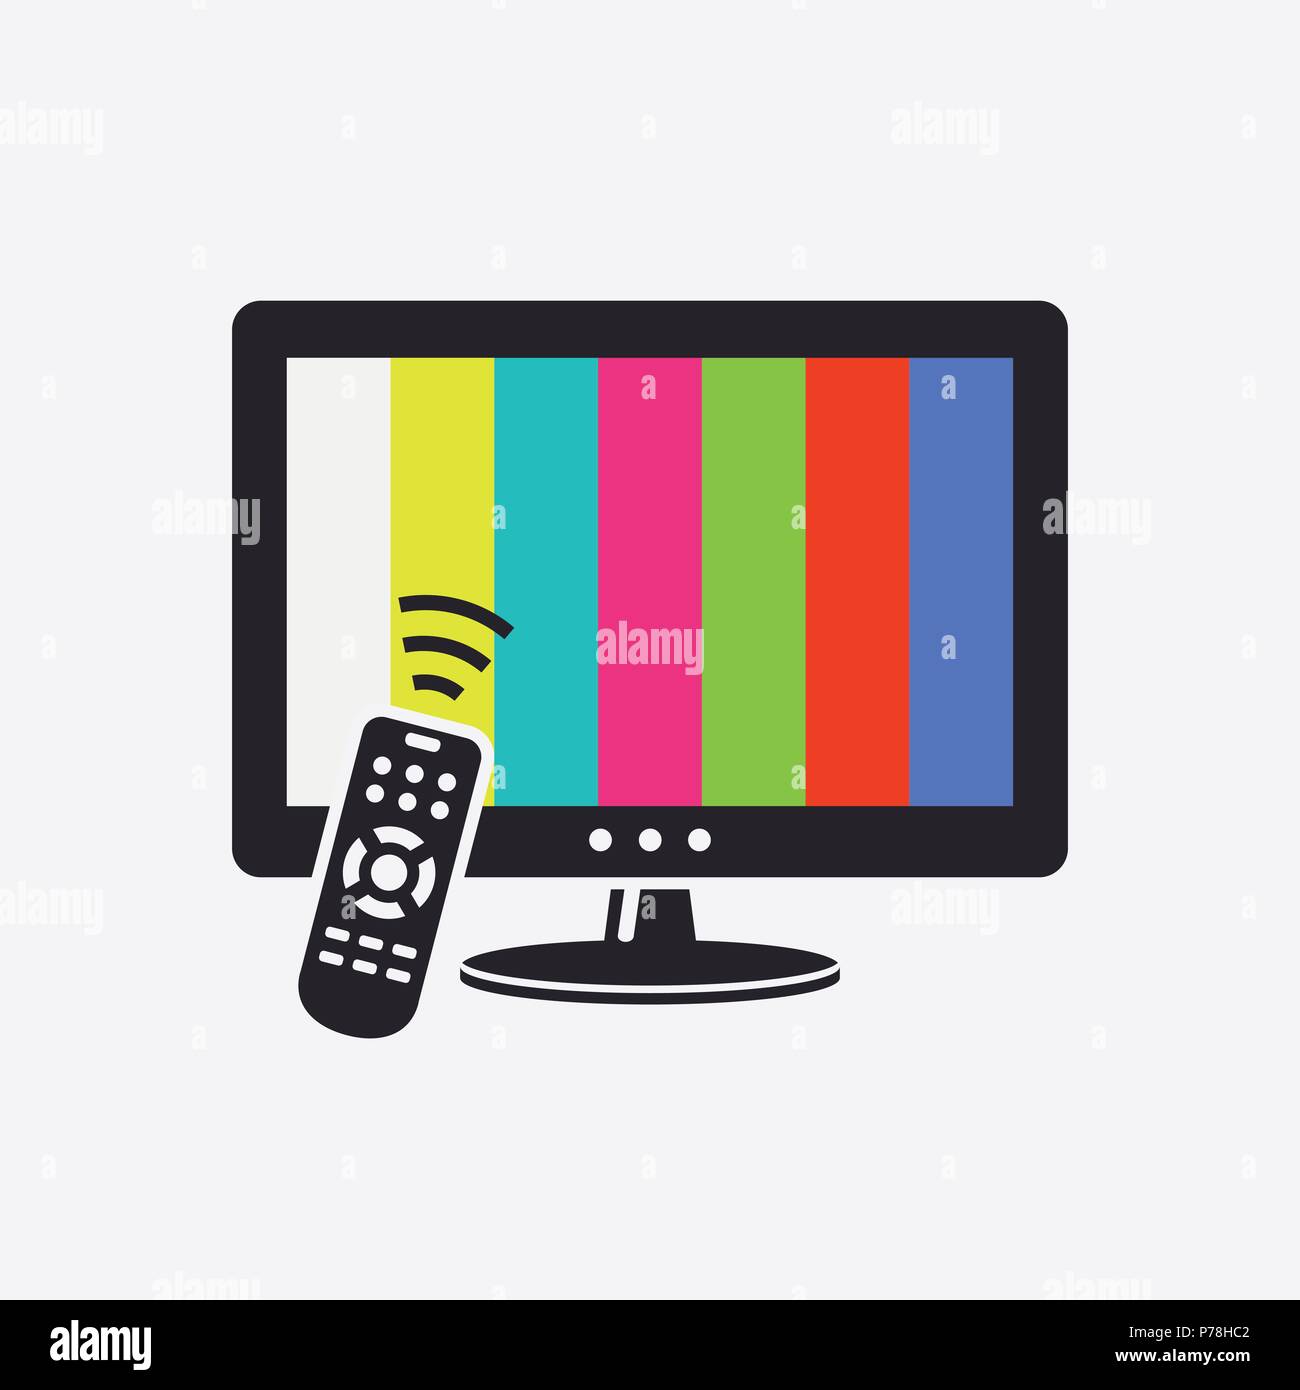 Smart TV with remote control icon. Vector illustration. Stock Vector